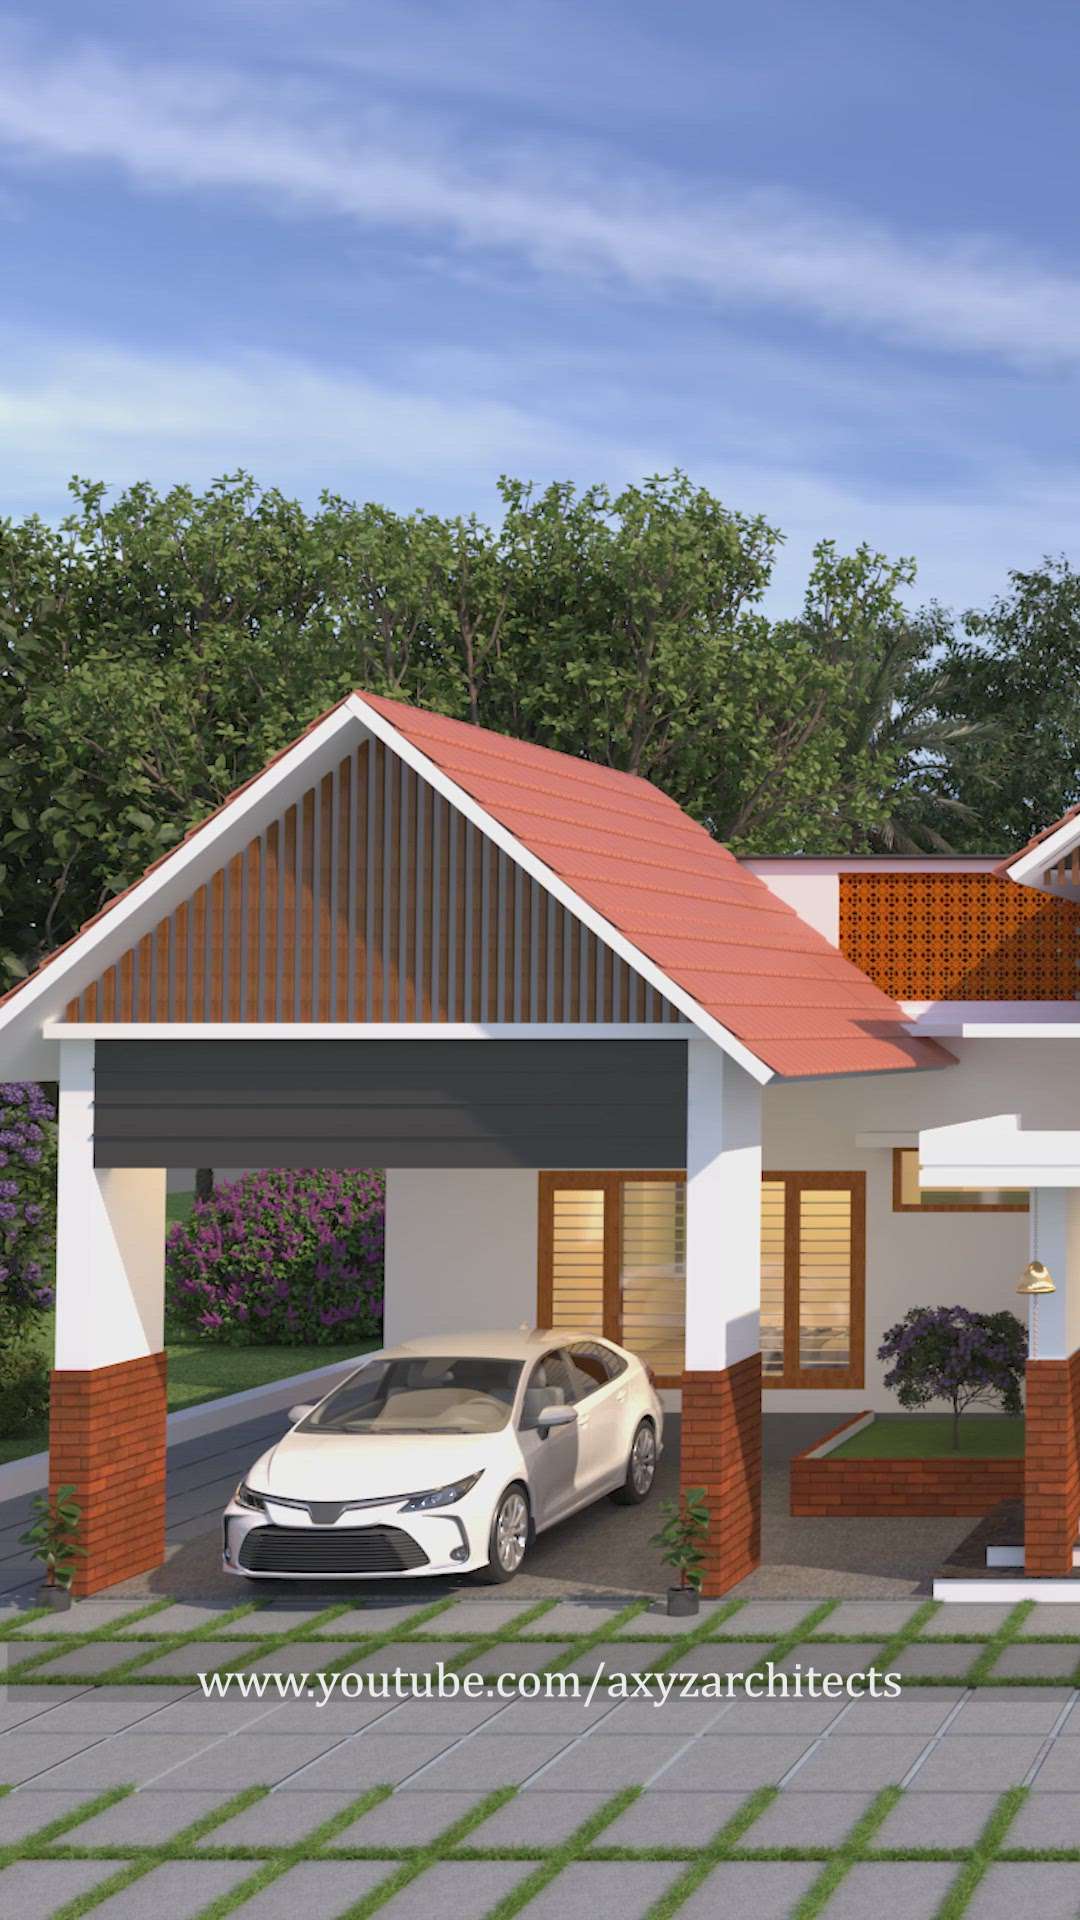 #HouseDesigns  #HouseDesigns  #ContemporaryHouse  #50LakhHouse  #MixedRoofHouse  #TraditionalHouse  #HouseConstruction  #KeralaStyleHouse  #keralahomedesignz  #keralahomeconcepts  #keralahomestyle  #keralahomesdesign  #budgethomes  #budgethouses  #budgethomeplan